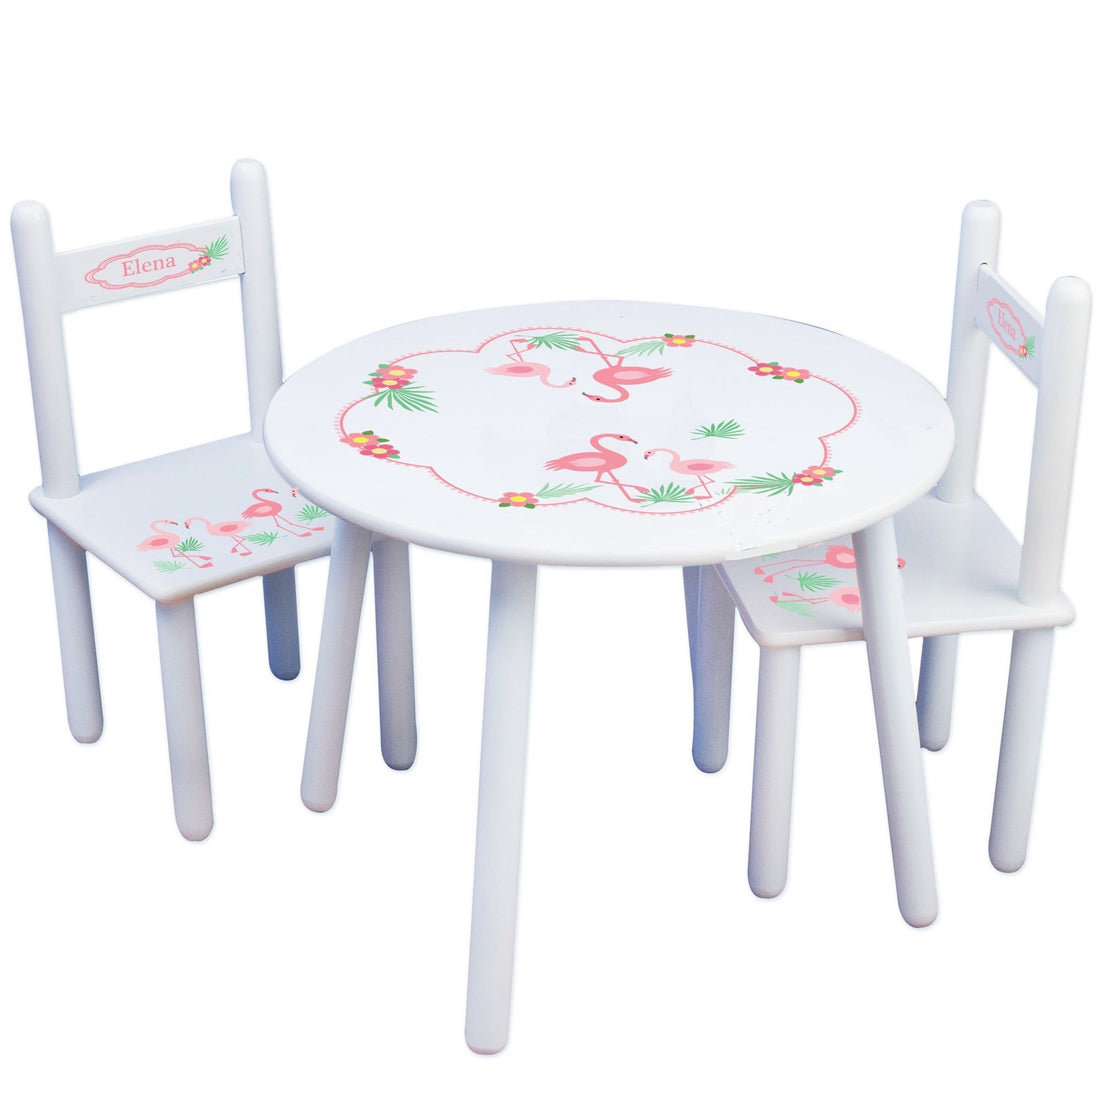 Personalized Table and Chairs with Palm Flamingo design